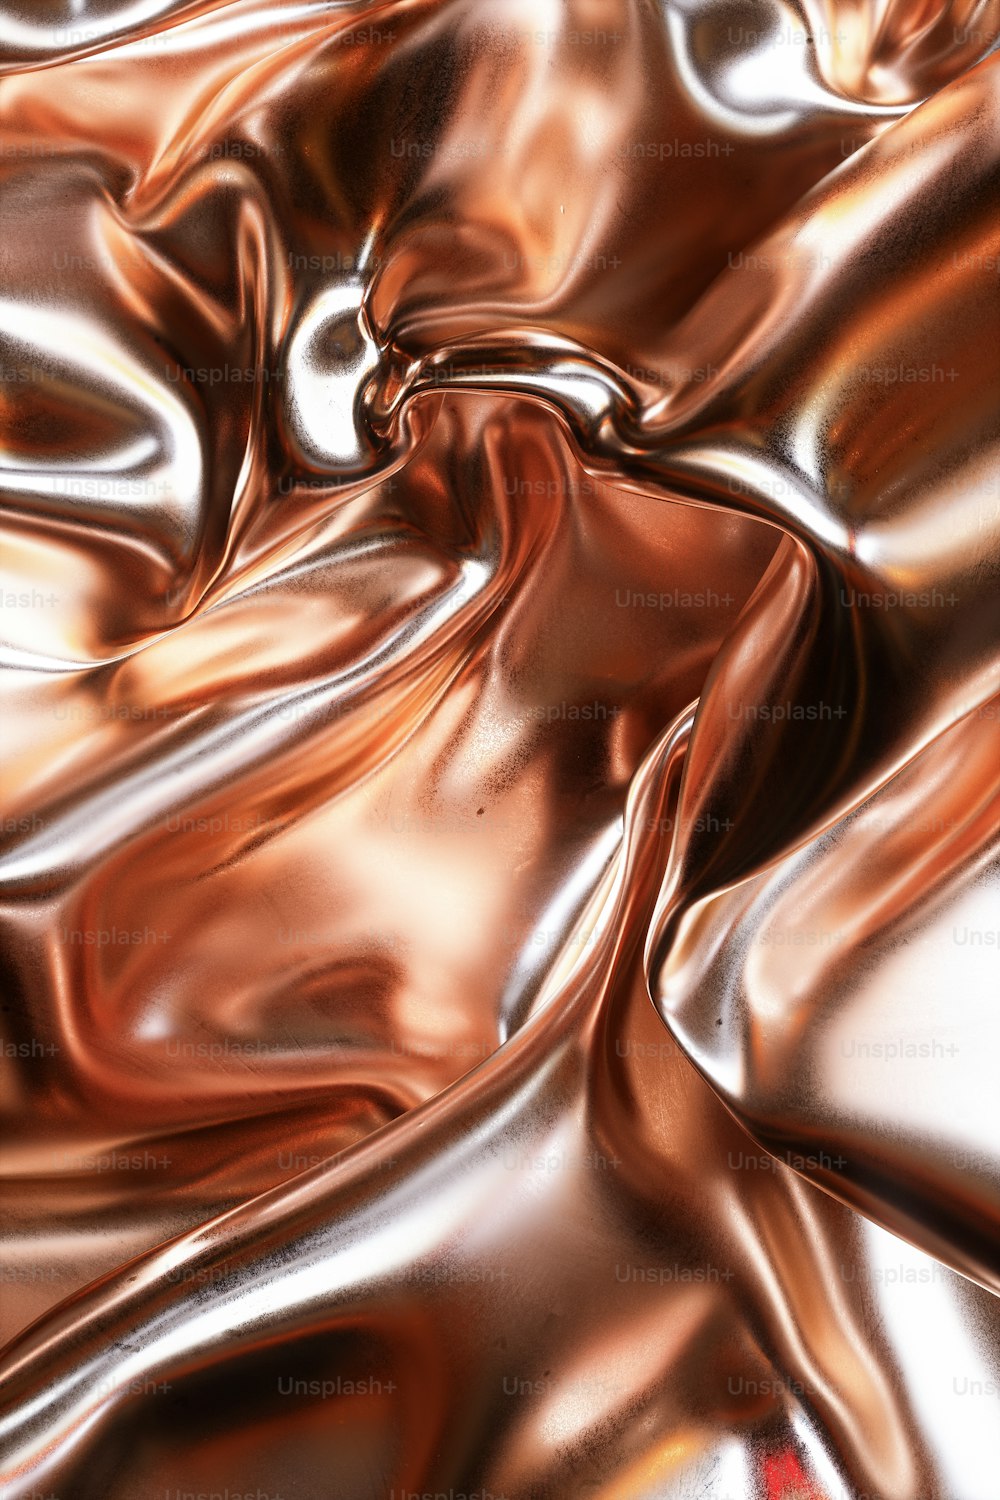 a close up view of a metallic surface